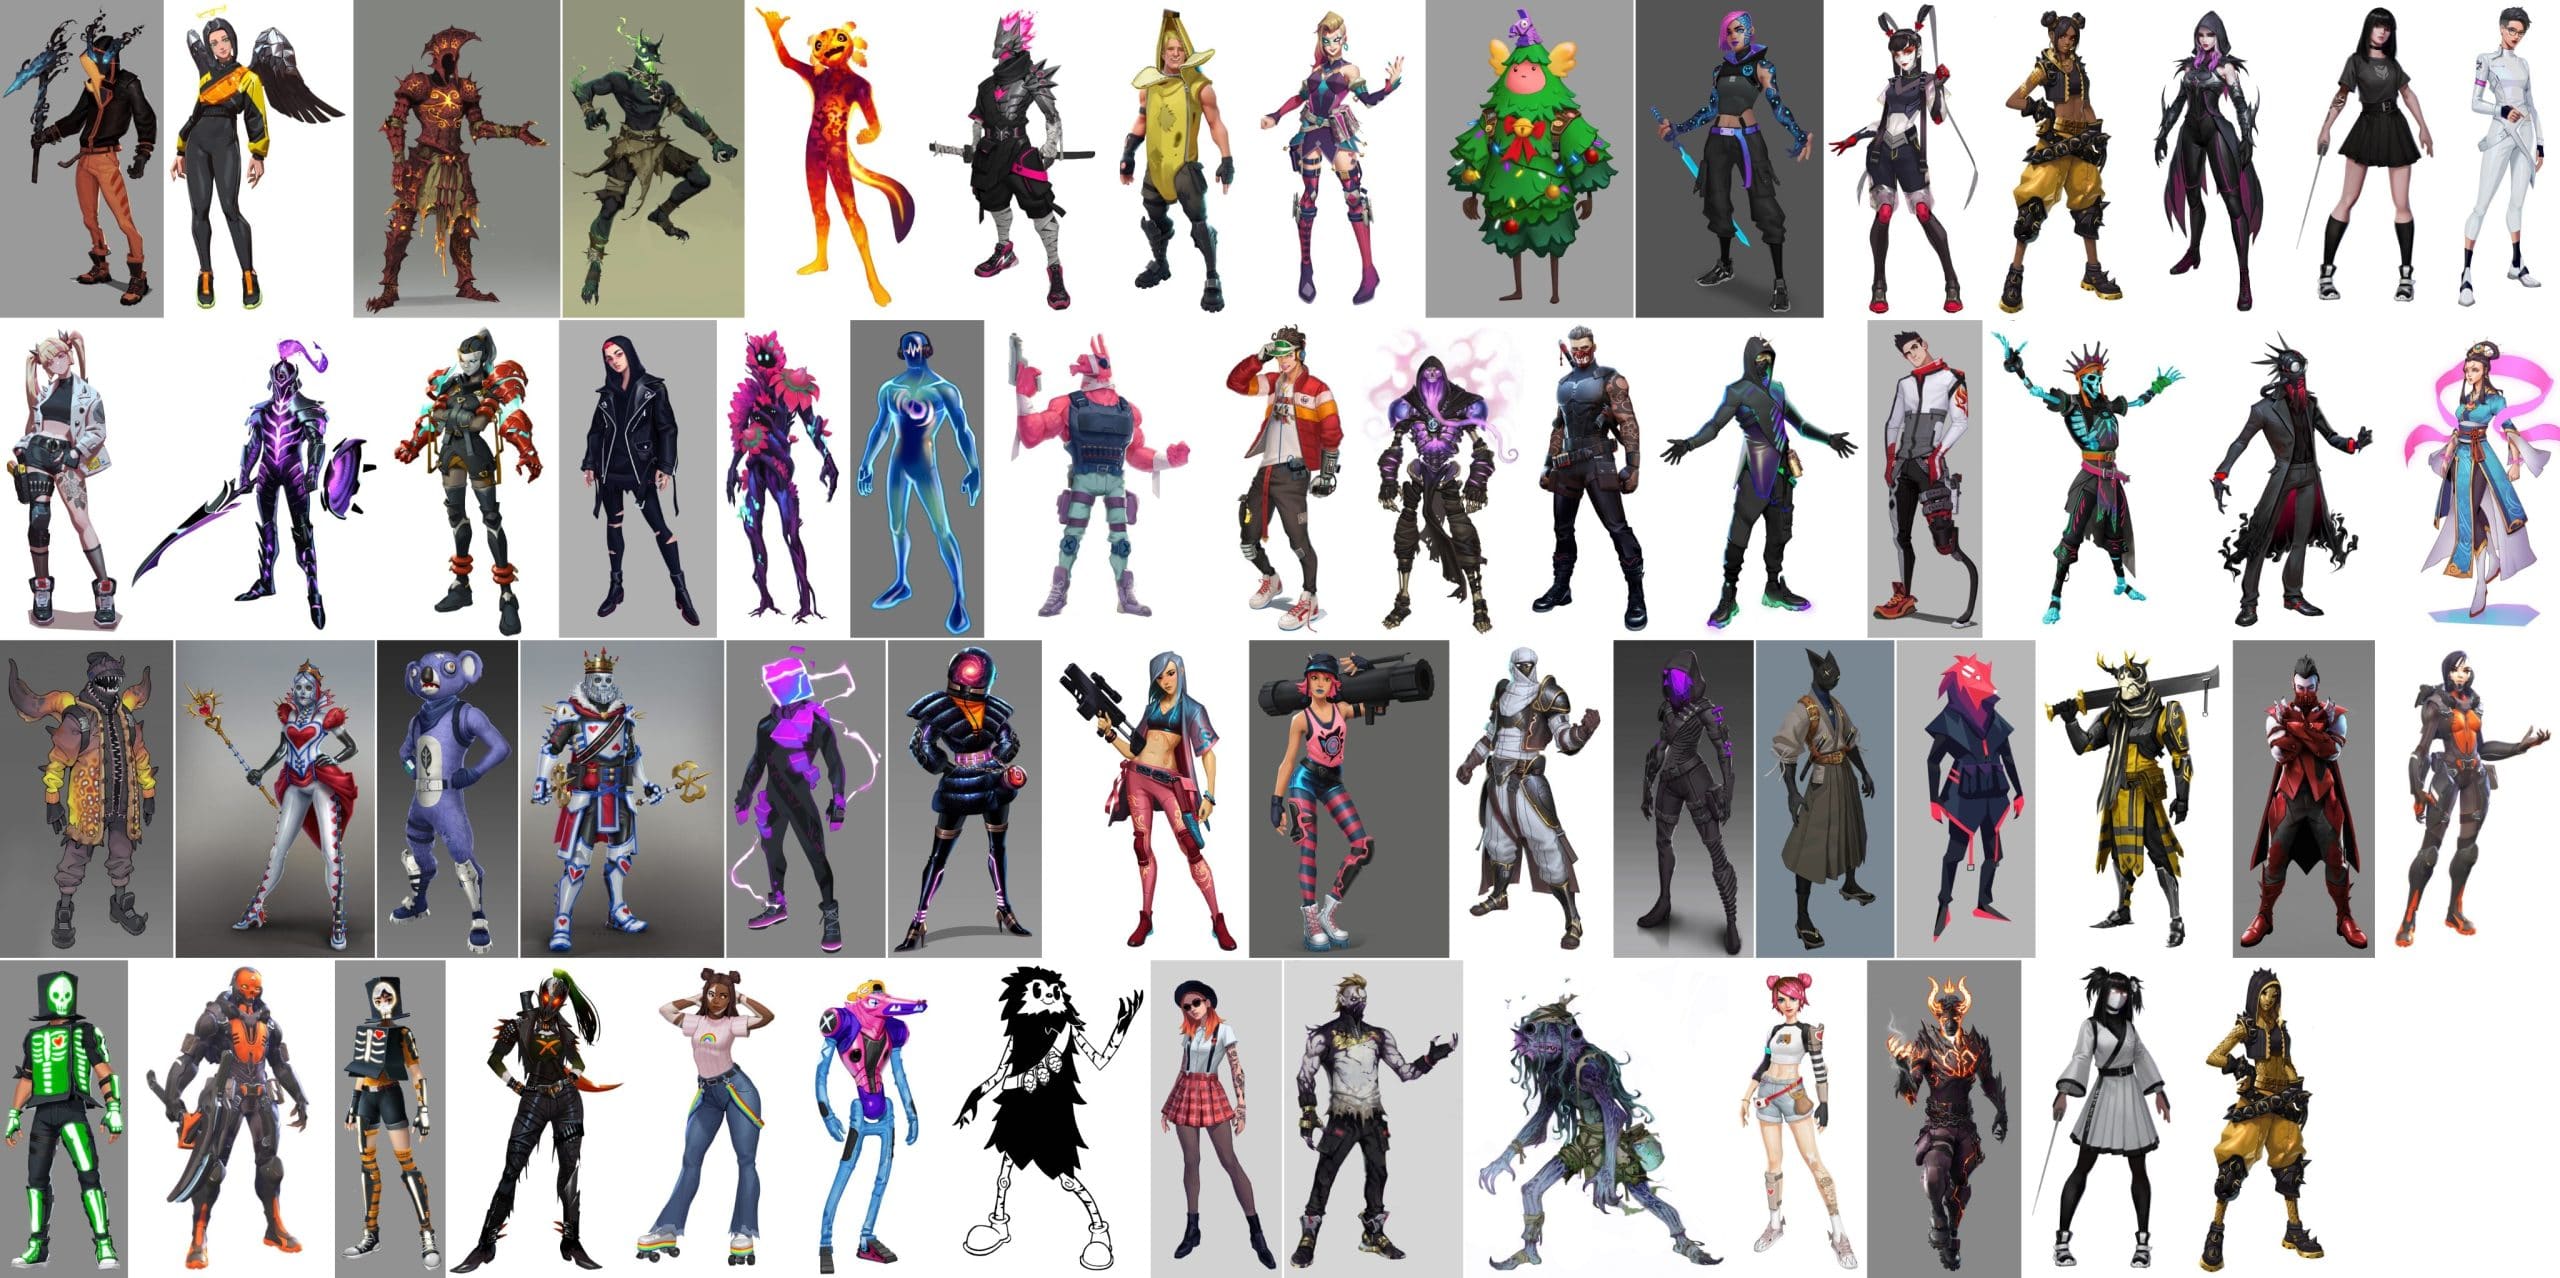 A new survey from Epic Games showed outfits that can get in Fortnite